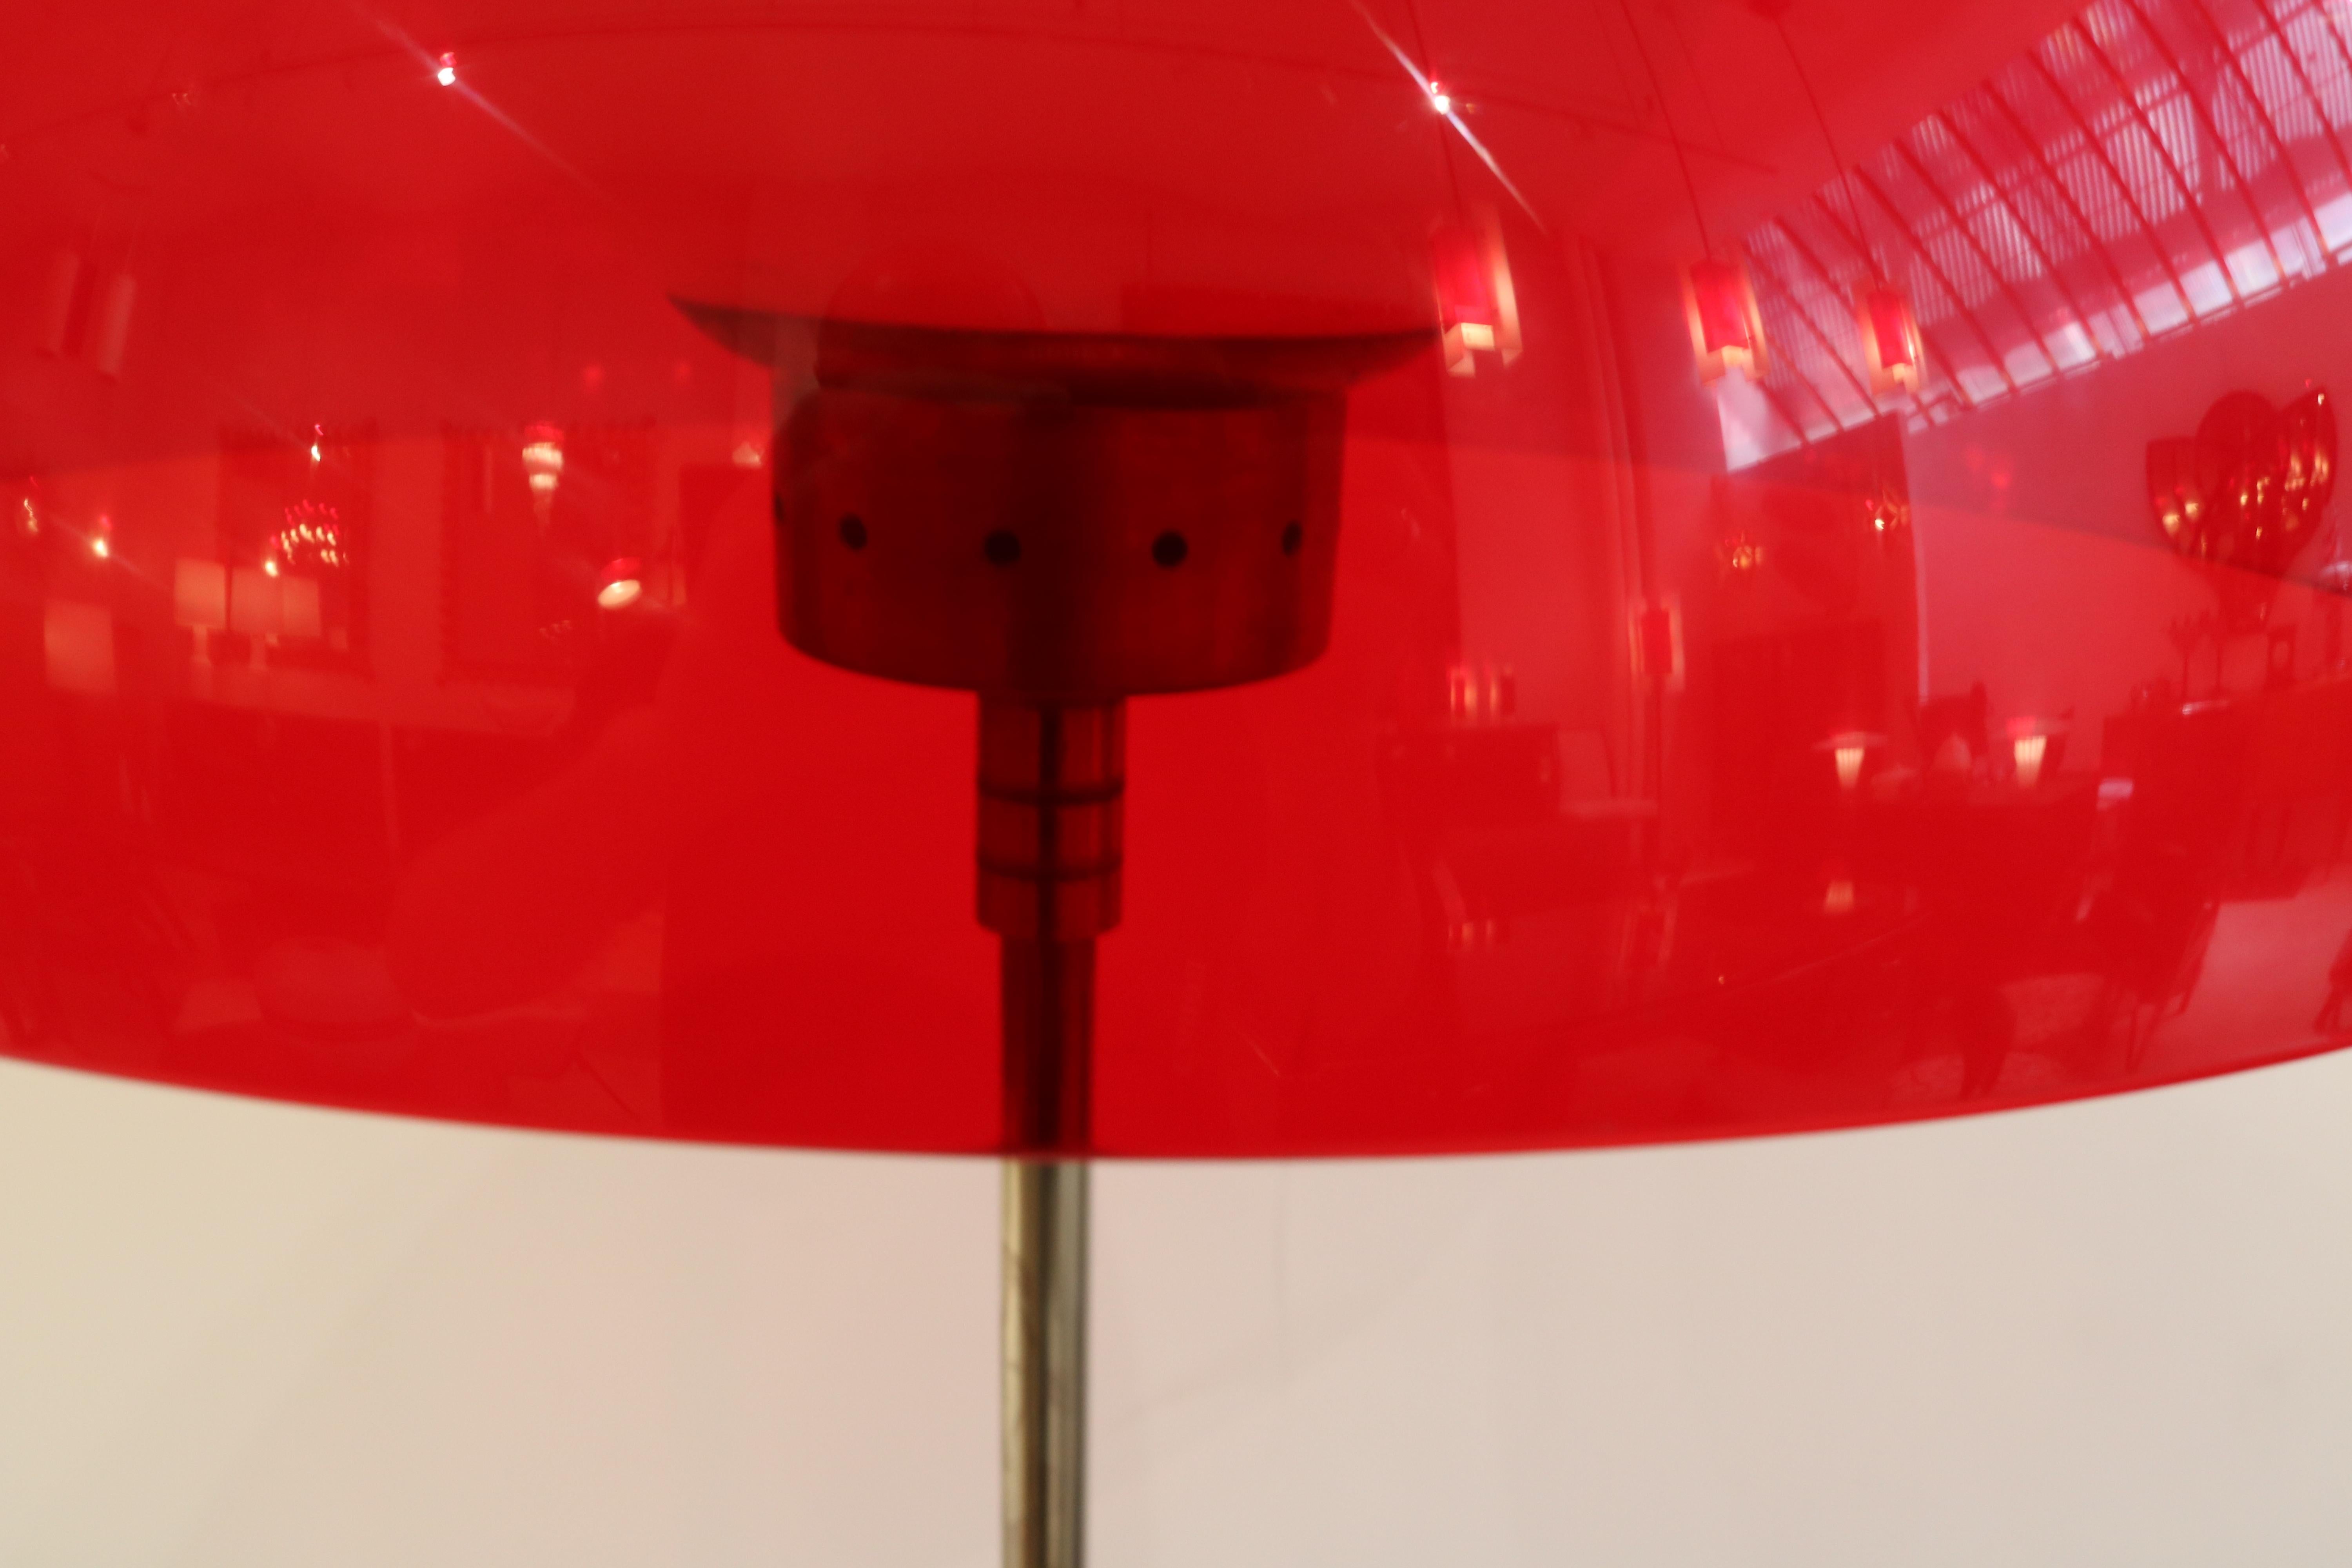 Italian Modernist floor lamp.
Red plastic shade merged with metal decorative elements and interior frosted glass globe.
Supported by patinated metal shaft resting on a marble base.